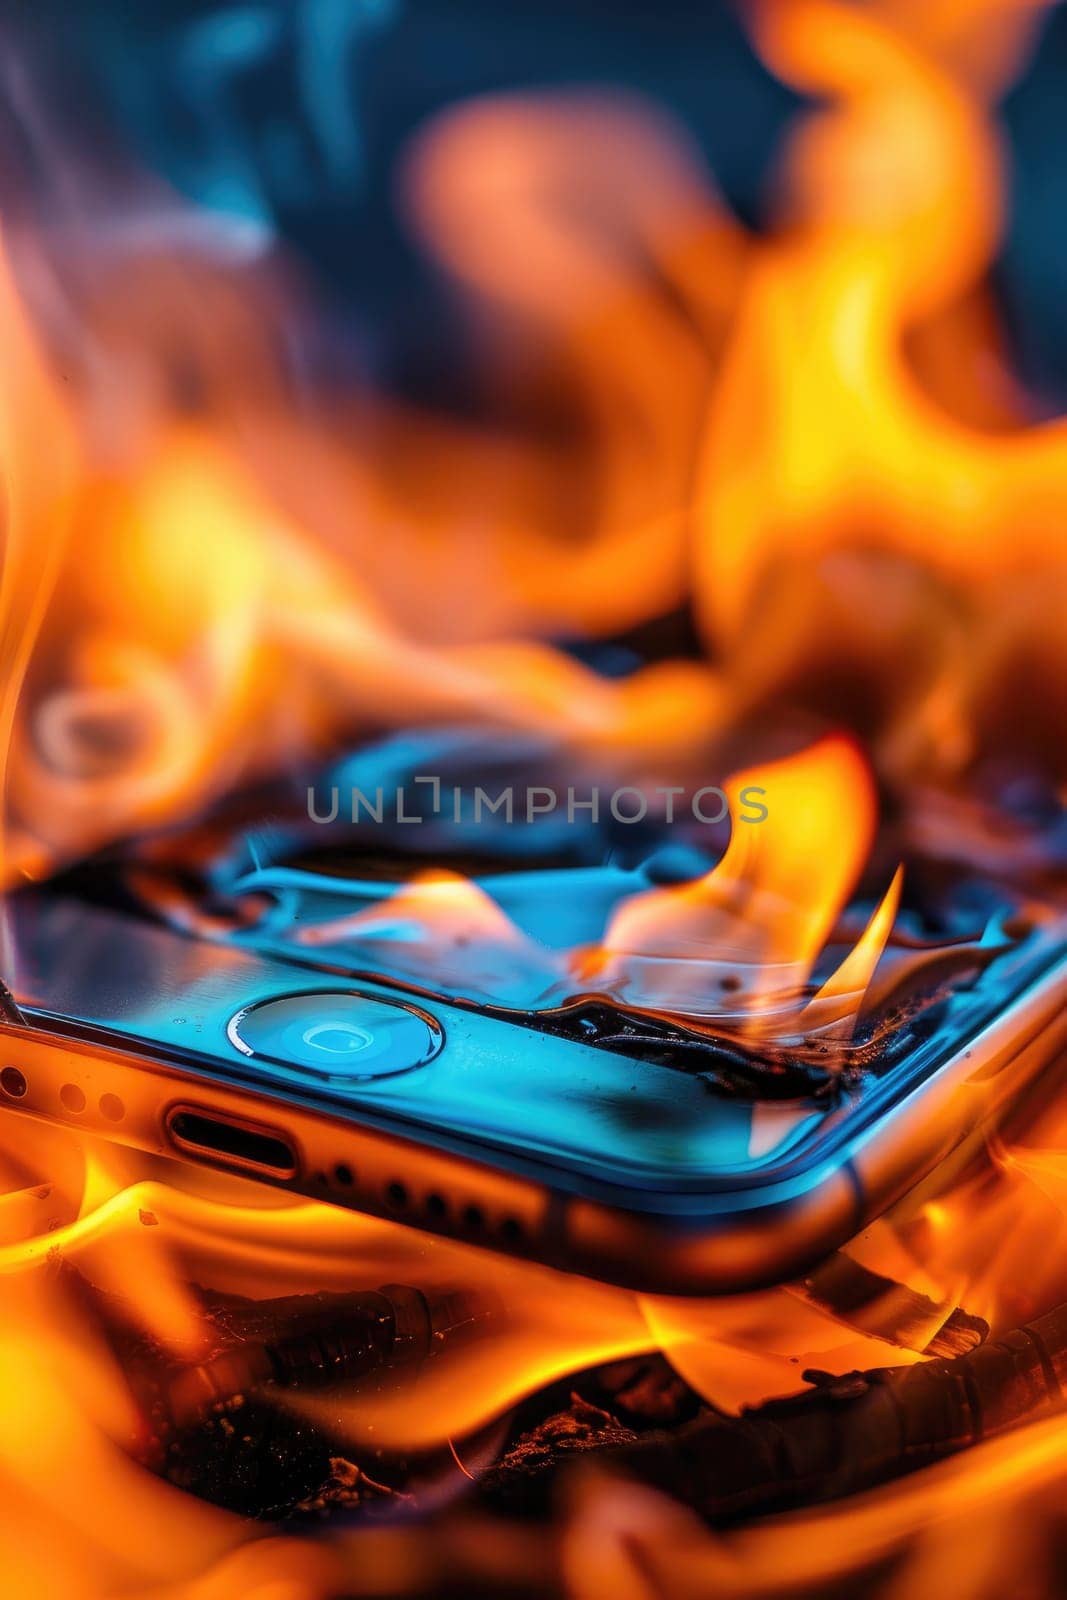 a close up of a smart phone in the form of an burn on fire. by Chawagen